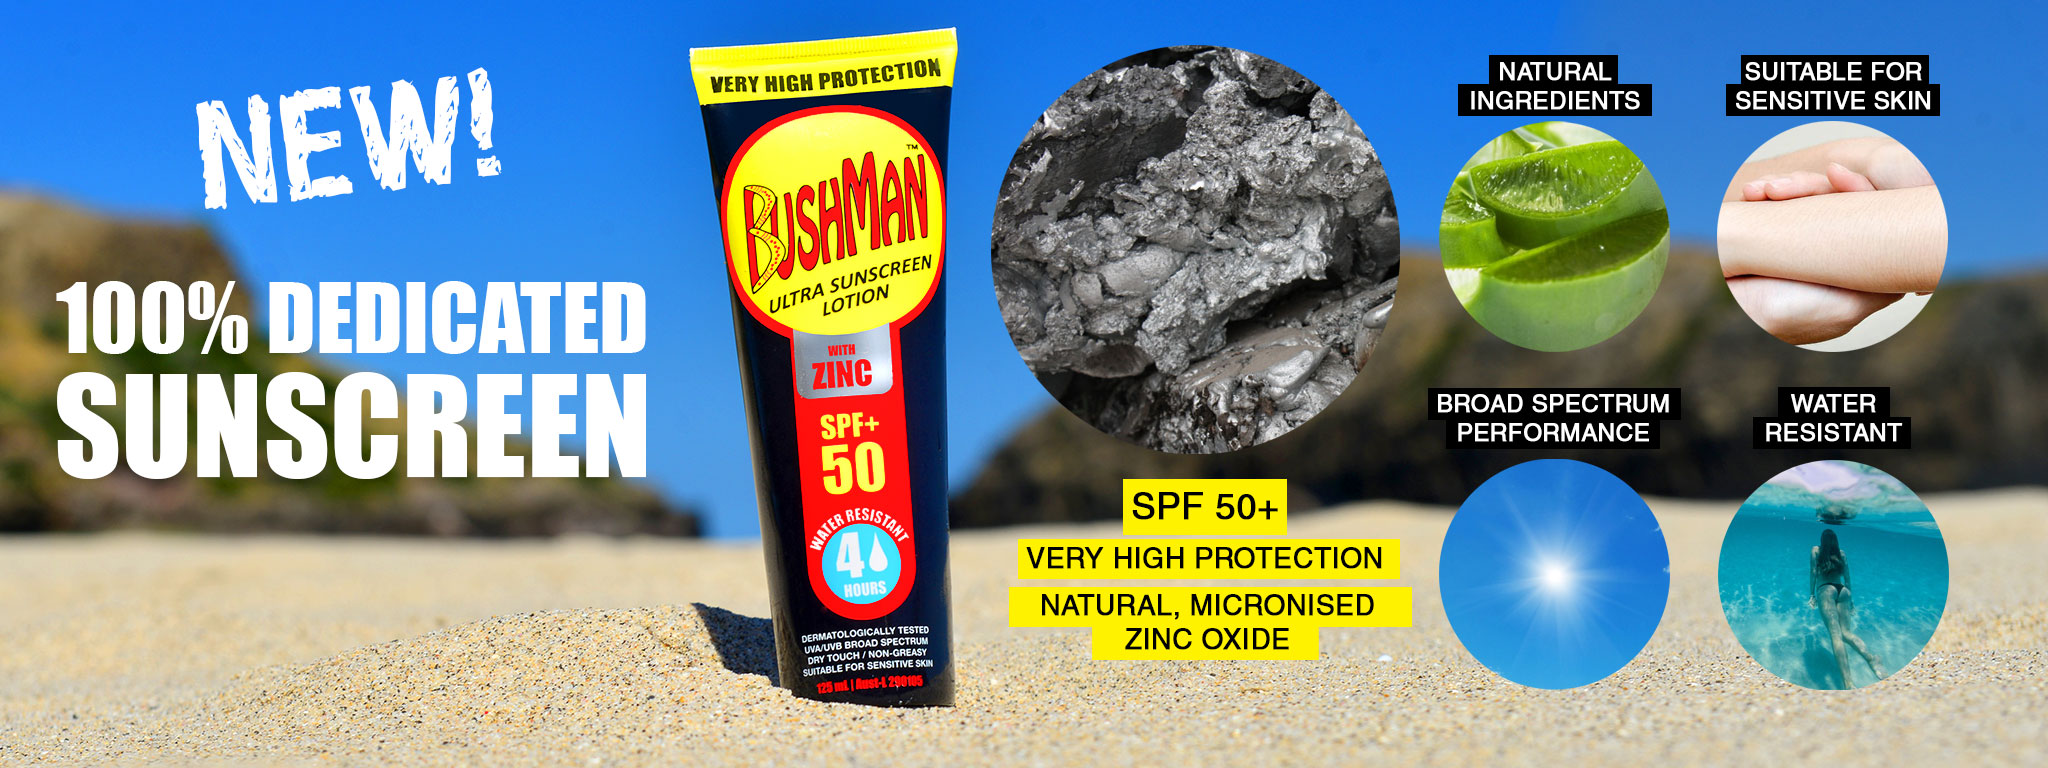 News Section Image: Visit the new Bushman Sunscreen Product webpage!